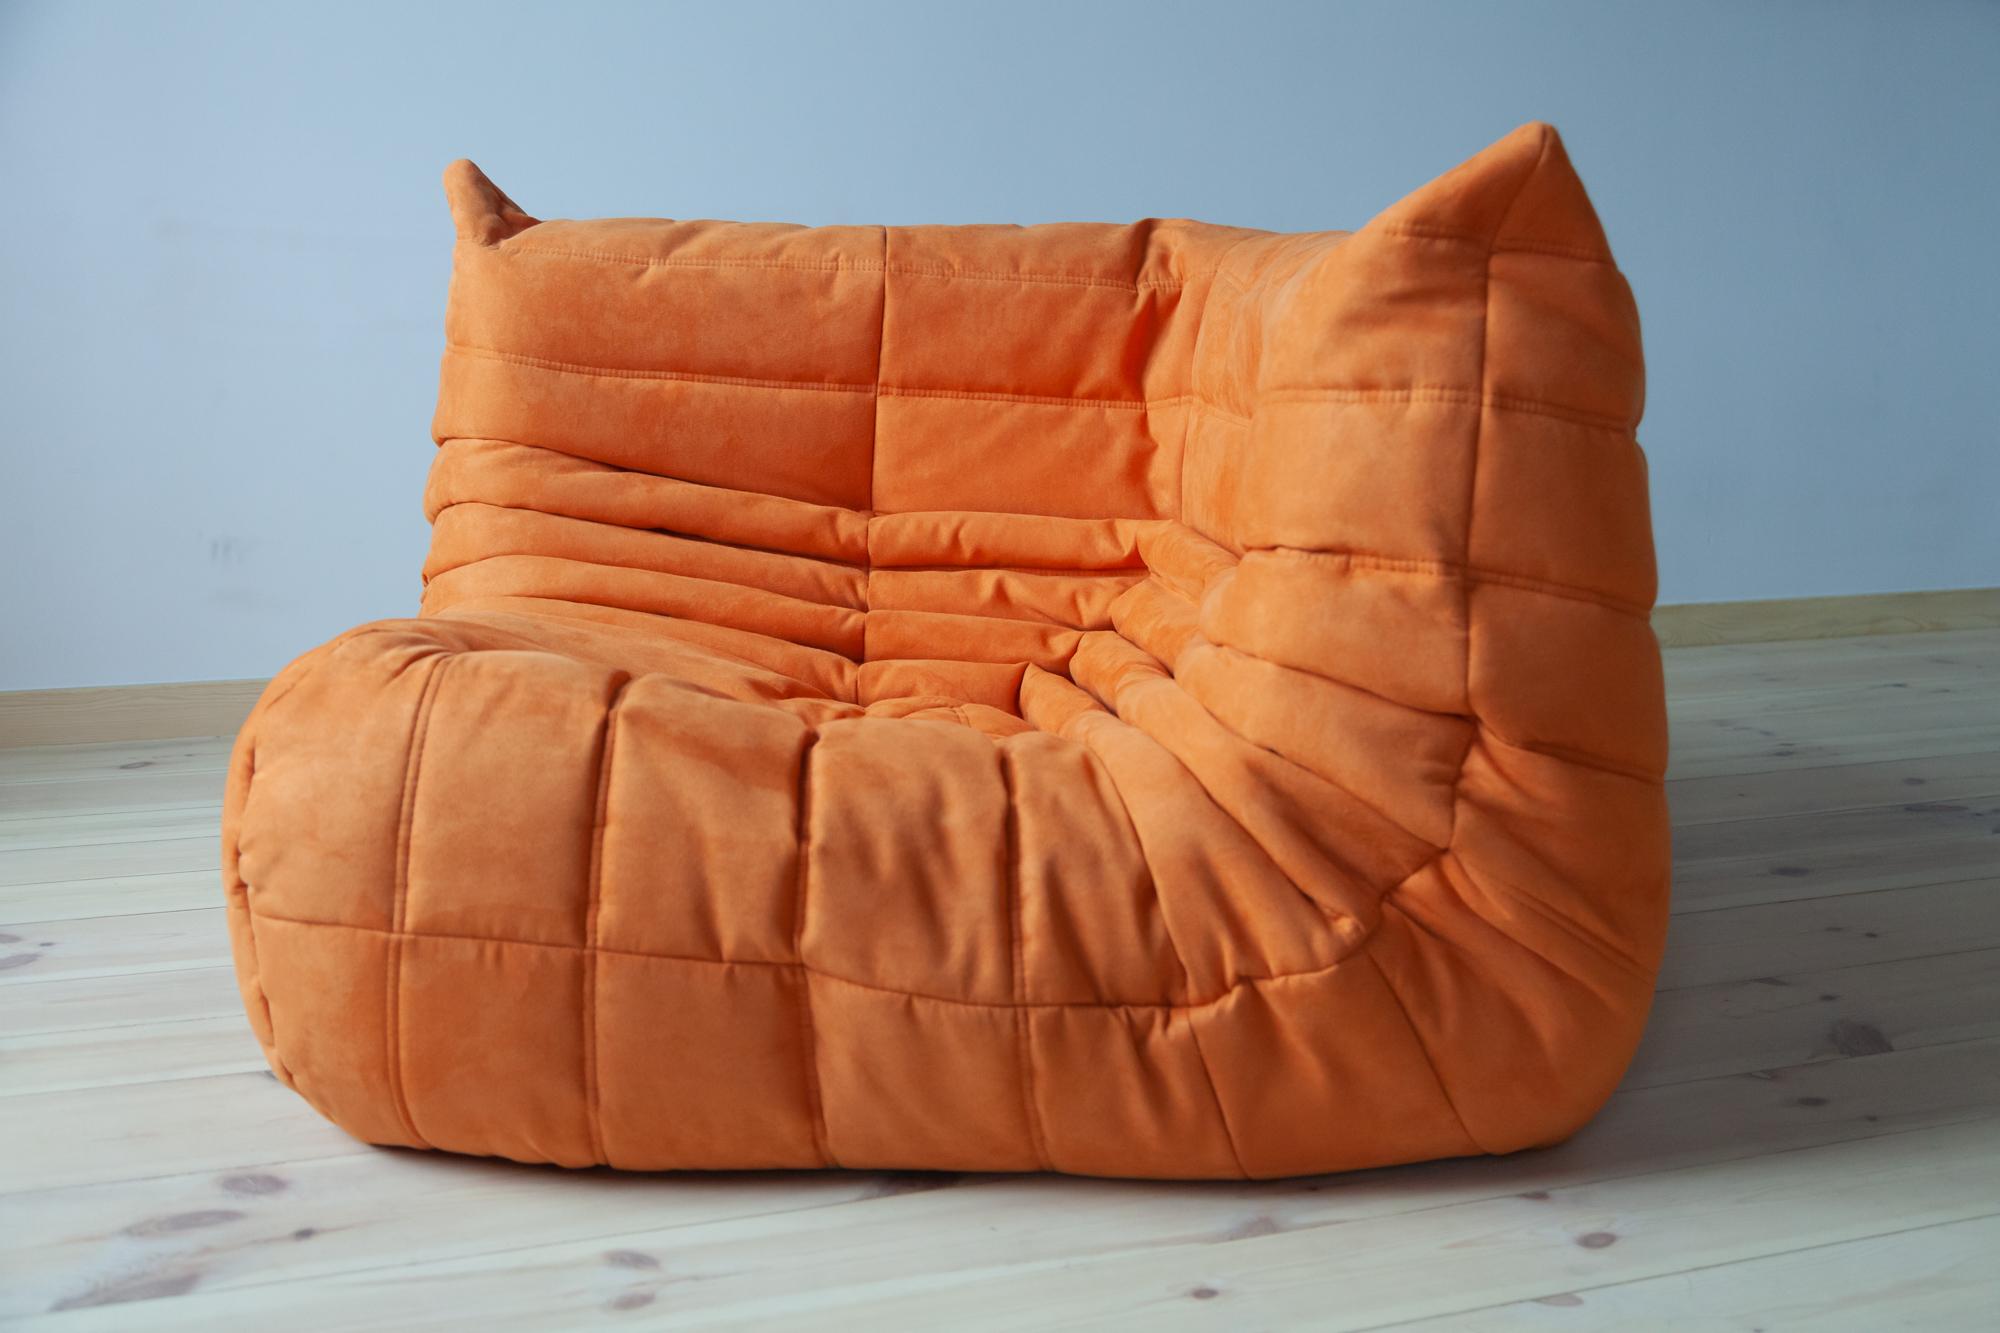 This togo corner couch was designed by Michel Ducaroy in 1973 and was manufactured by Ligne Roset in France. It has been reupholstered in new orange microfibre (102 x 102 x 70 cm). It has the original Ligne Roset logo and genuine Ligne Roset